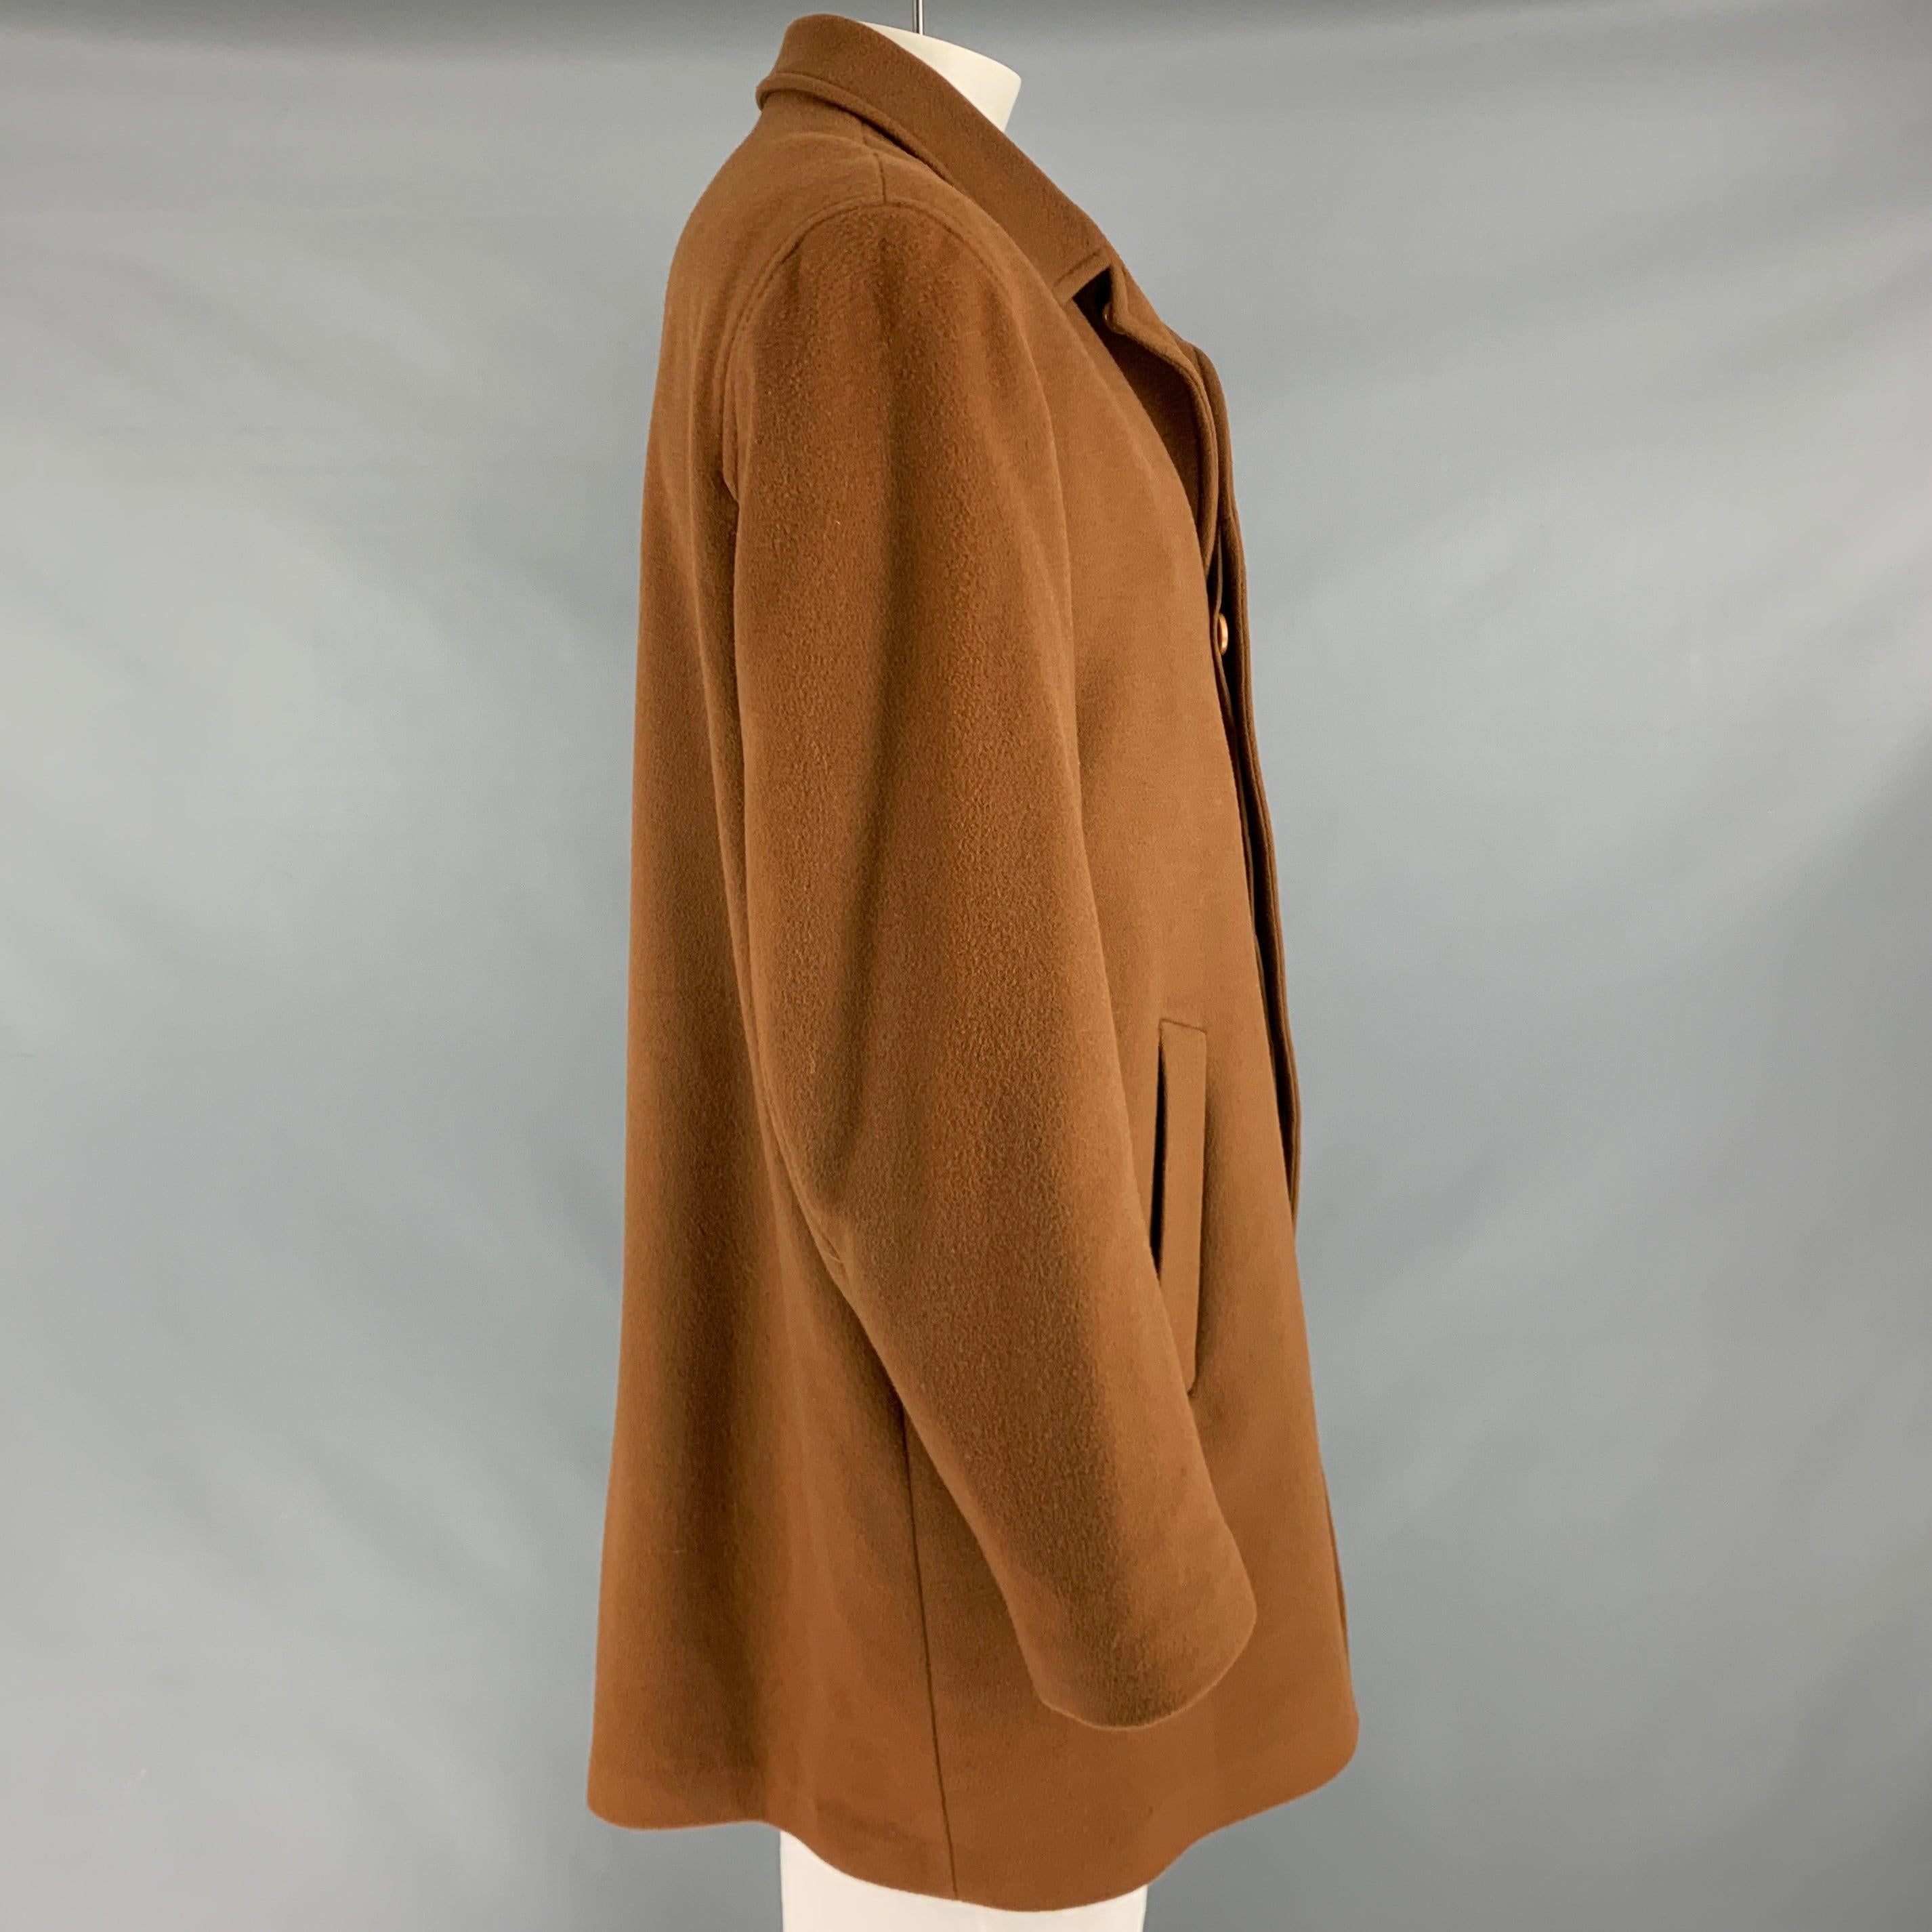 SAKS FIFTH AVENUE coat
in
a tan wool cashmere blend fabric featuring a single-breasted style, two exterior pockets, and hidden button closure. Made in Italy.Very Good Pre-Owned Condition. Moderate signs of wear. 

Marked:   58R 

Measurements: 
